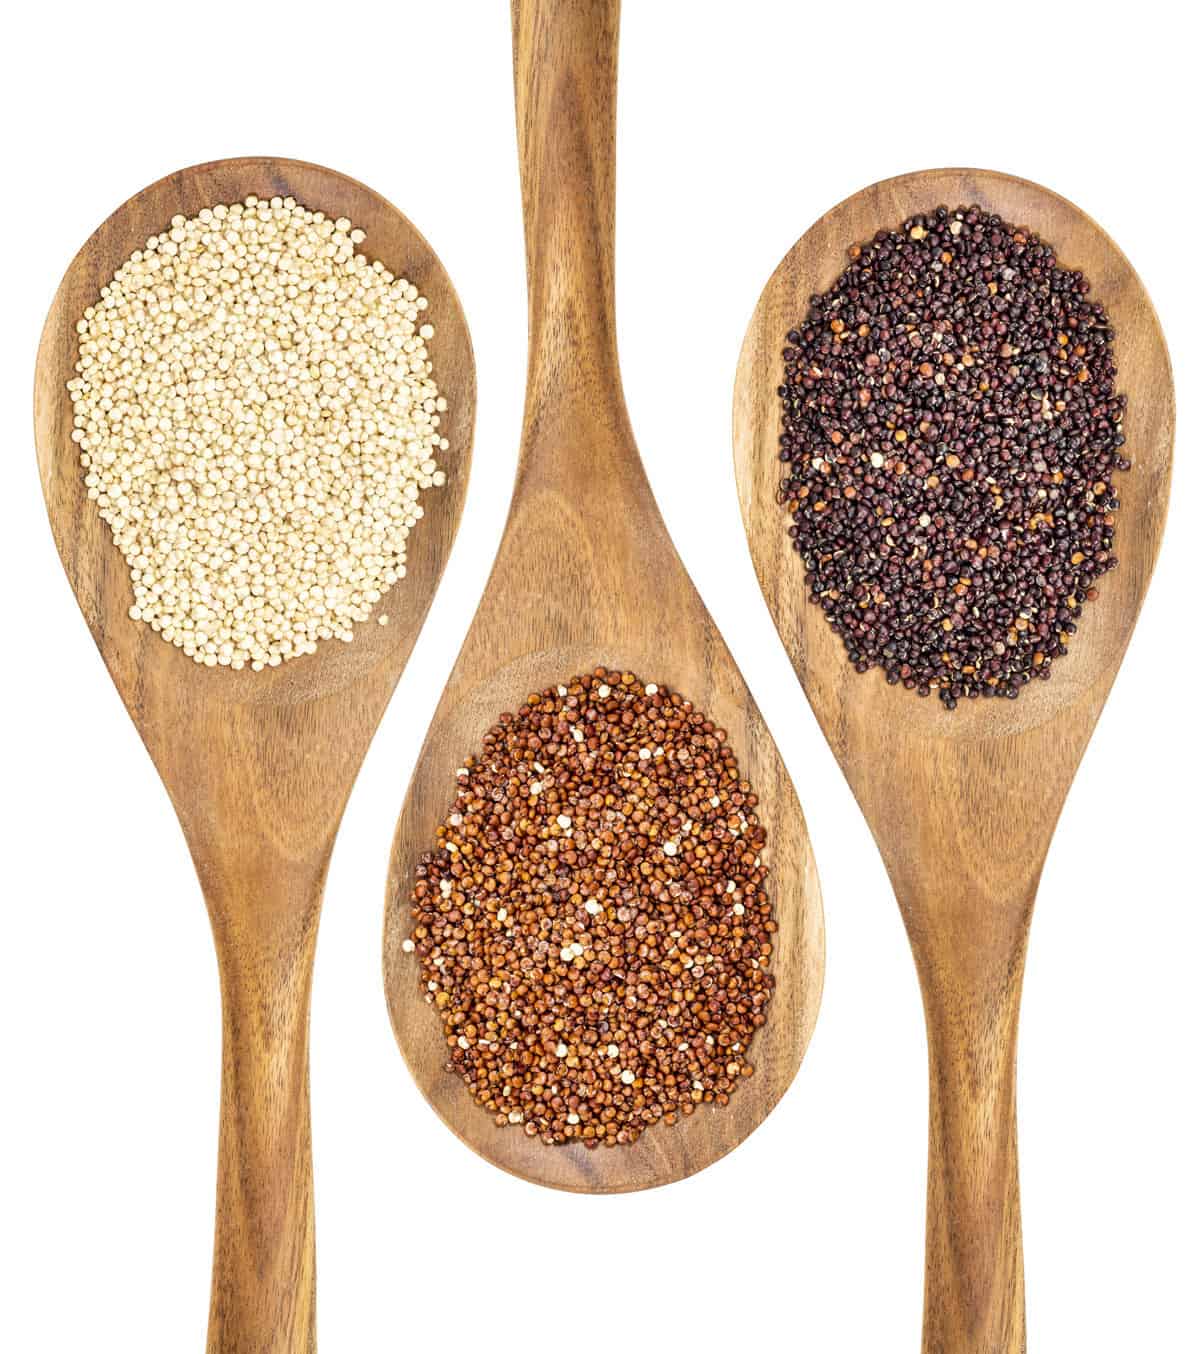 white, red, and black quinoa on separate wooden spoons